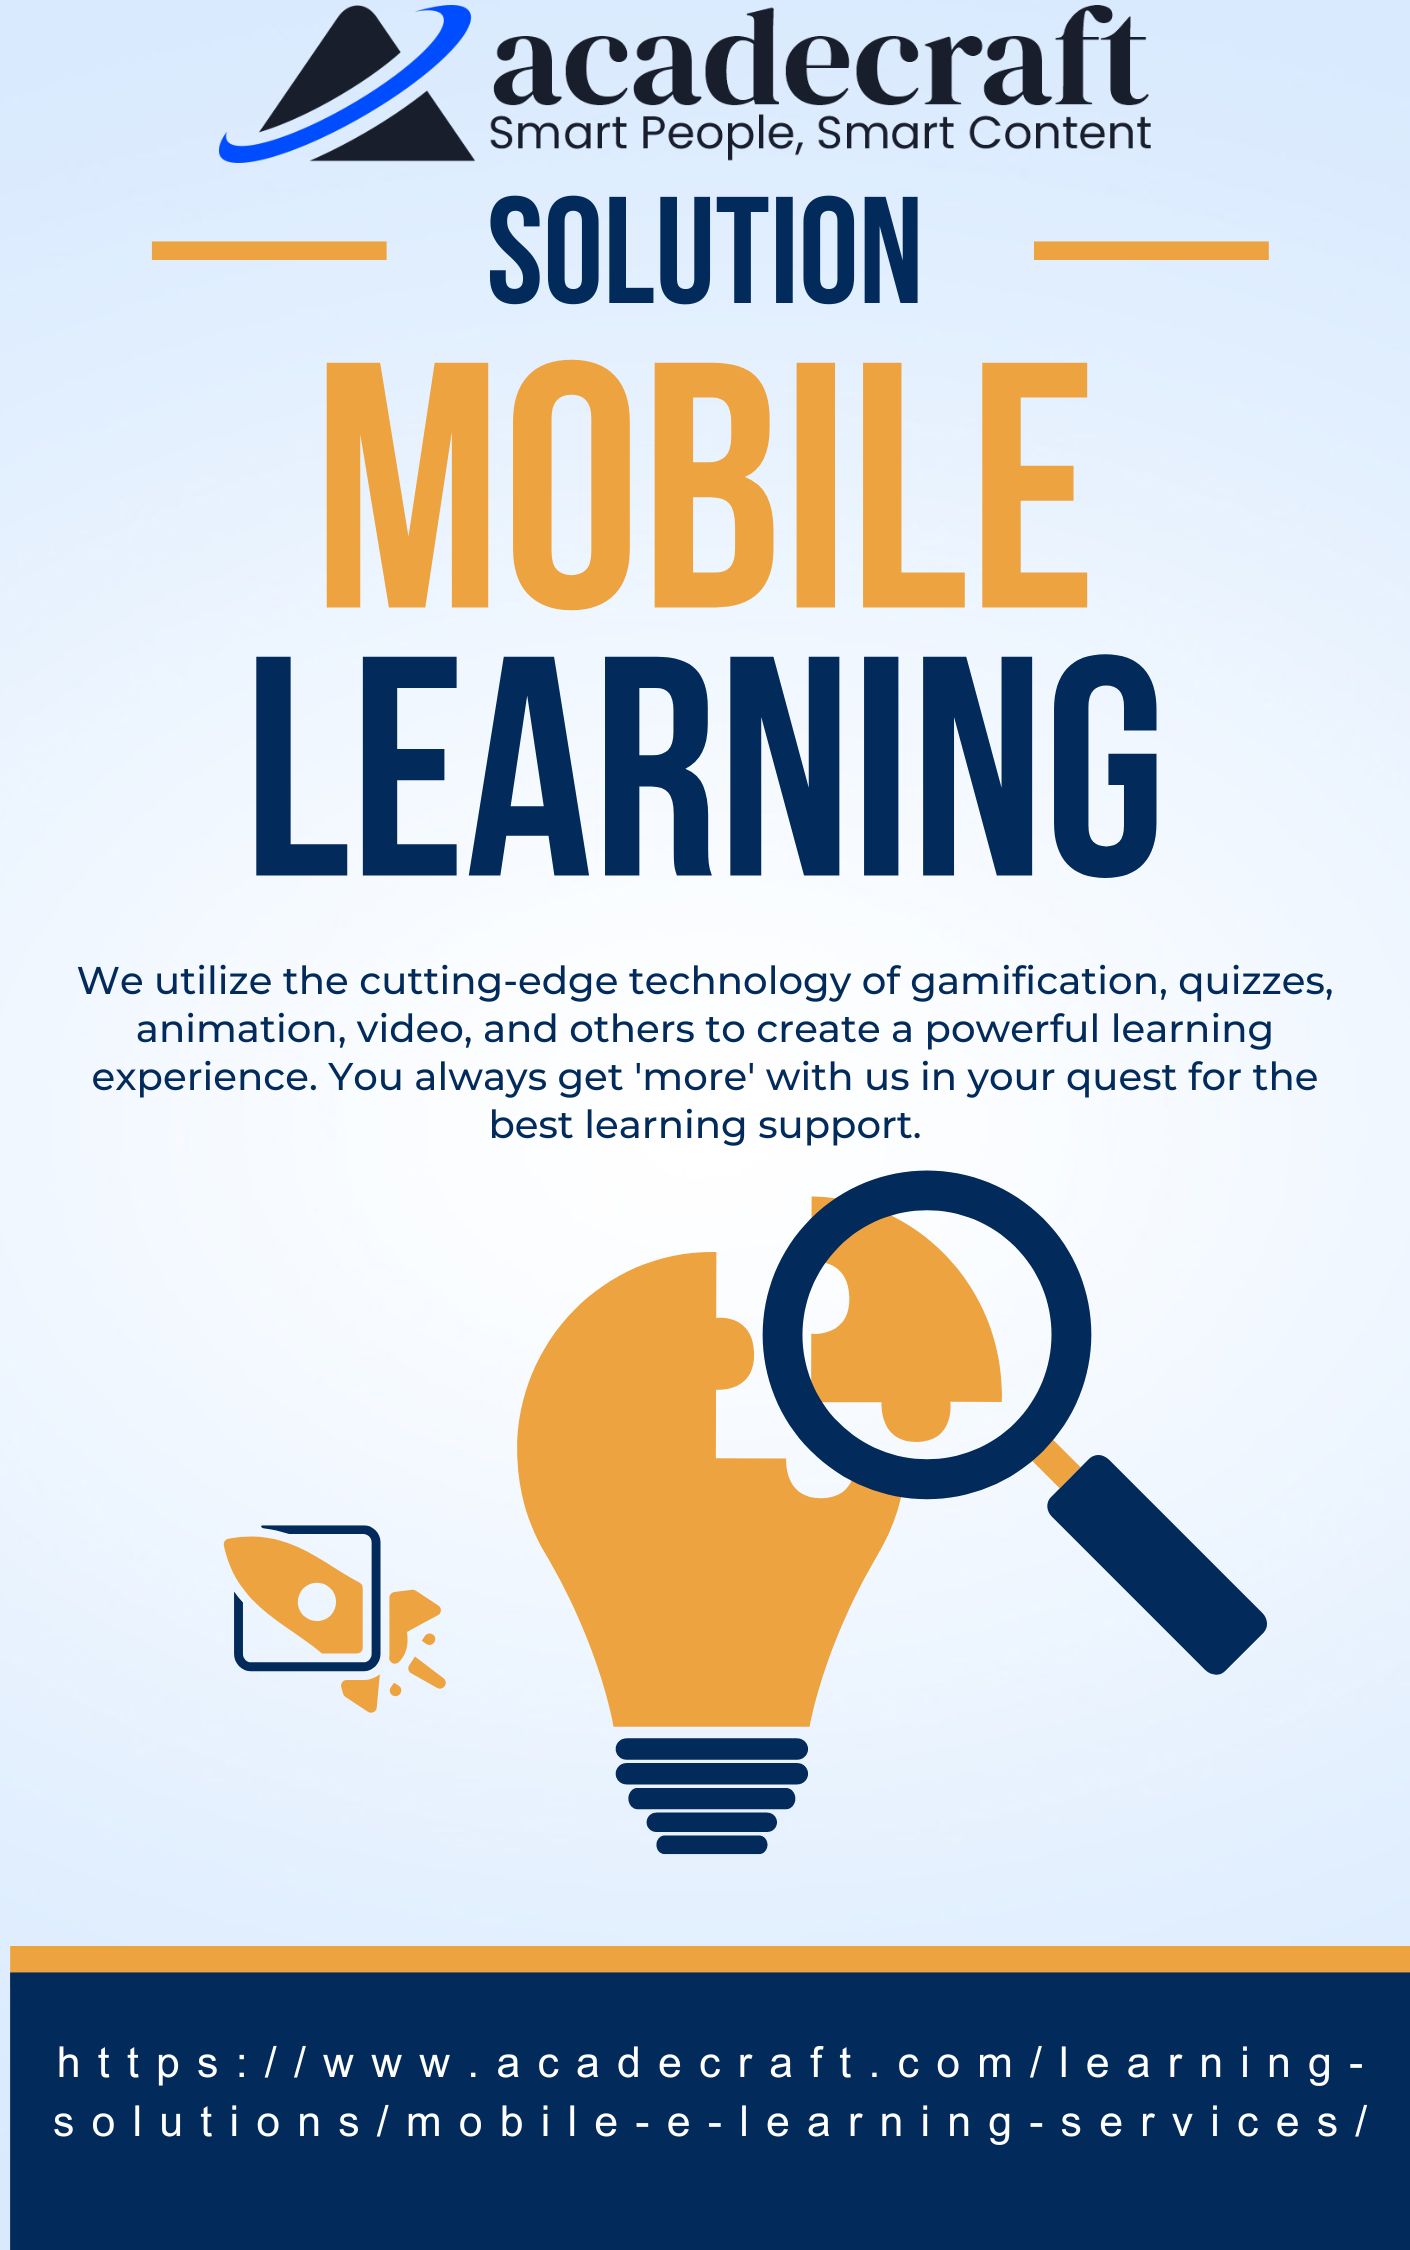 AZ acadecraft
SOLUTION

LEARNING

We utilize the cutting-edge technology of gamification, quizzes,
animation, video, and others to create a powerful learning
experience. You always get 'more' with us in your quest for the
best learning support.

3)

https://www.acadecraft.com/learning-

solutions/mobile-e-learning-services/